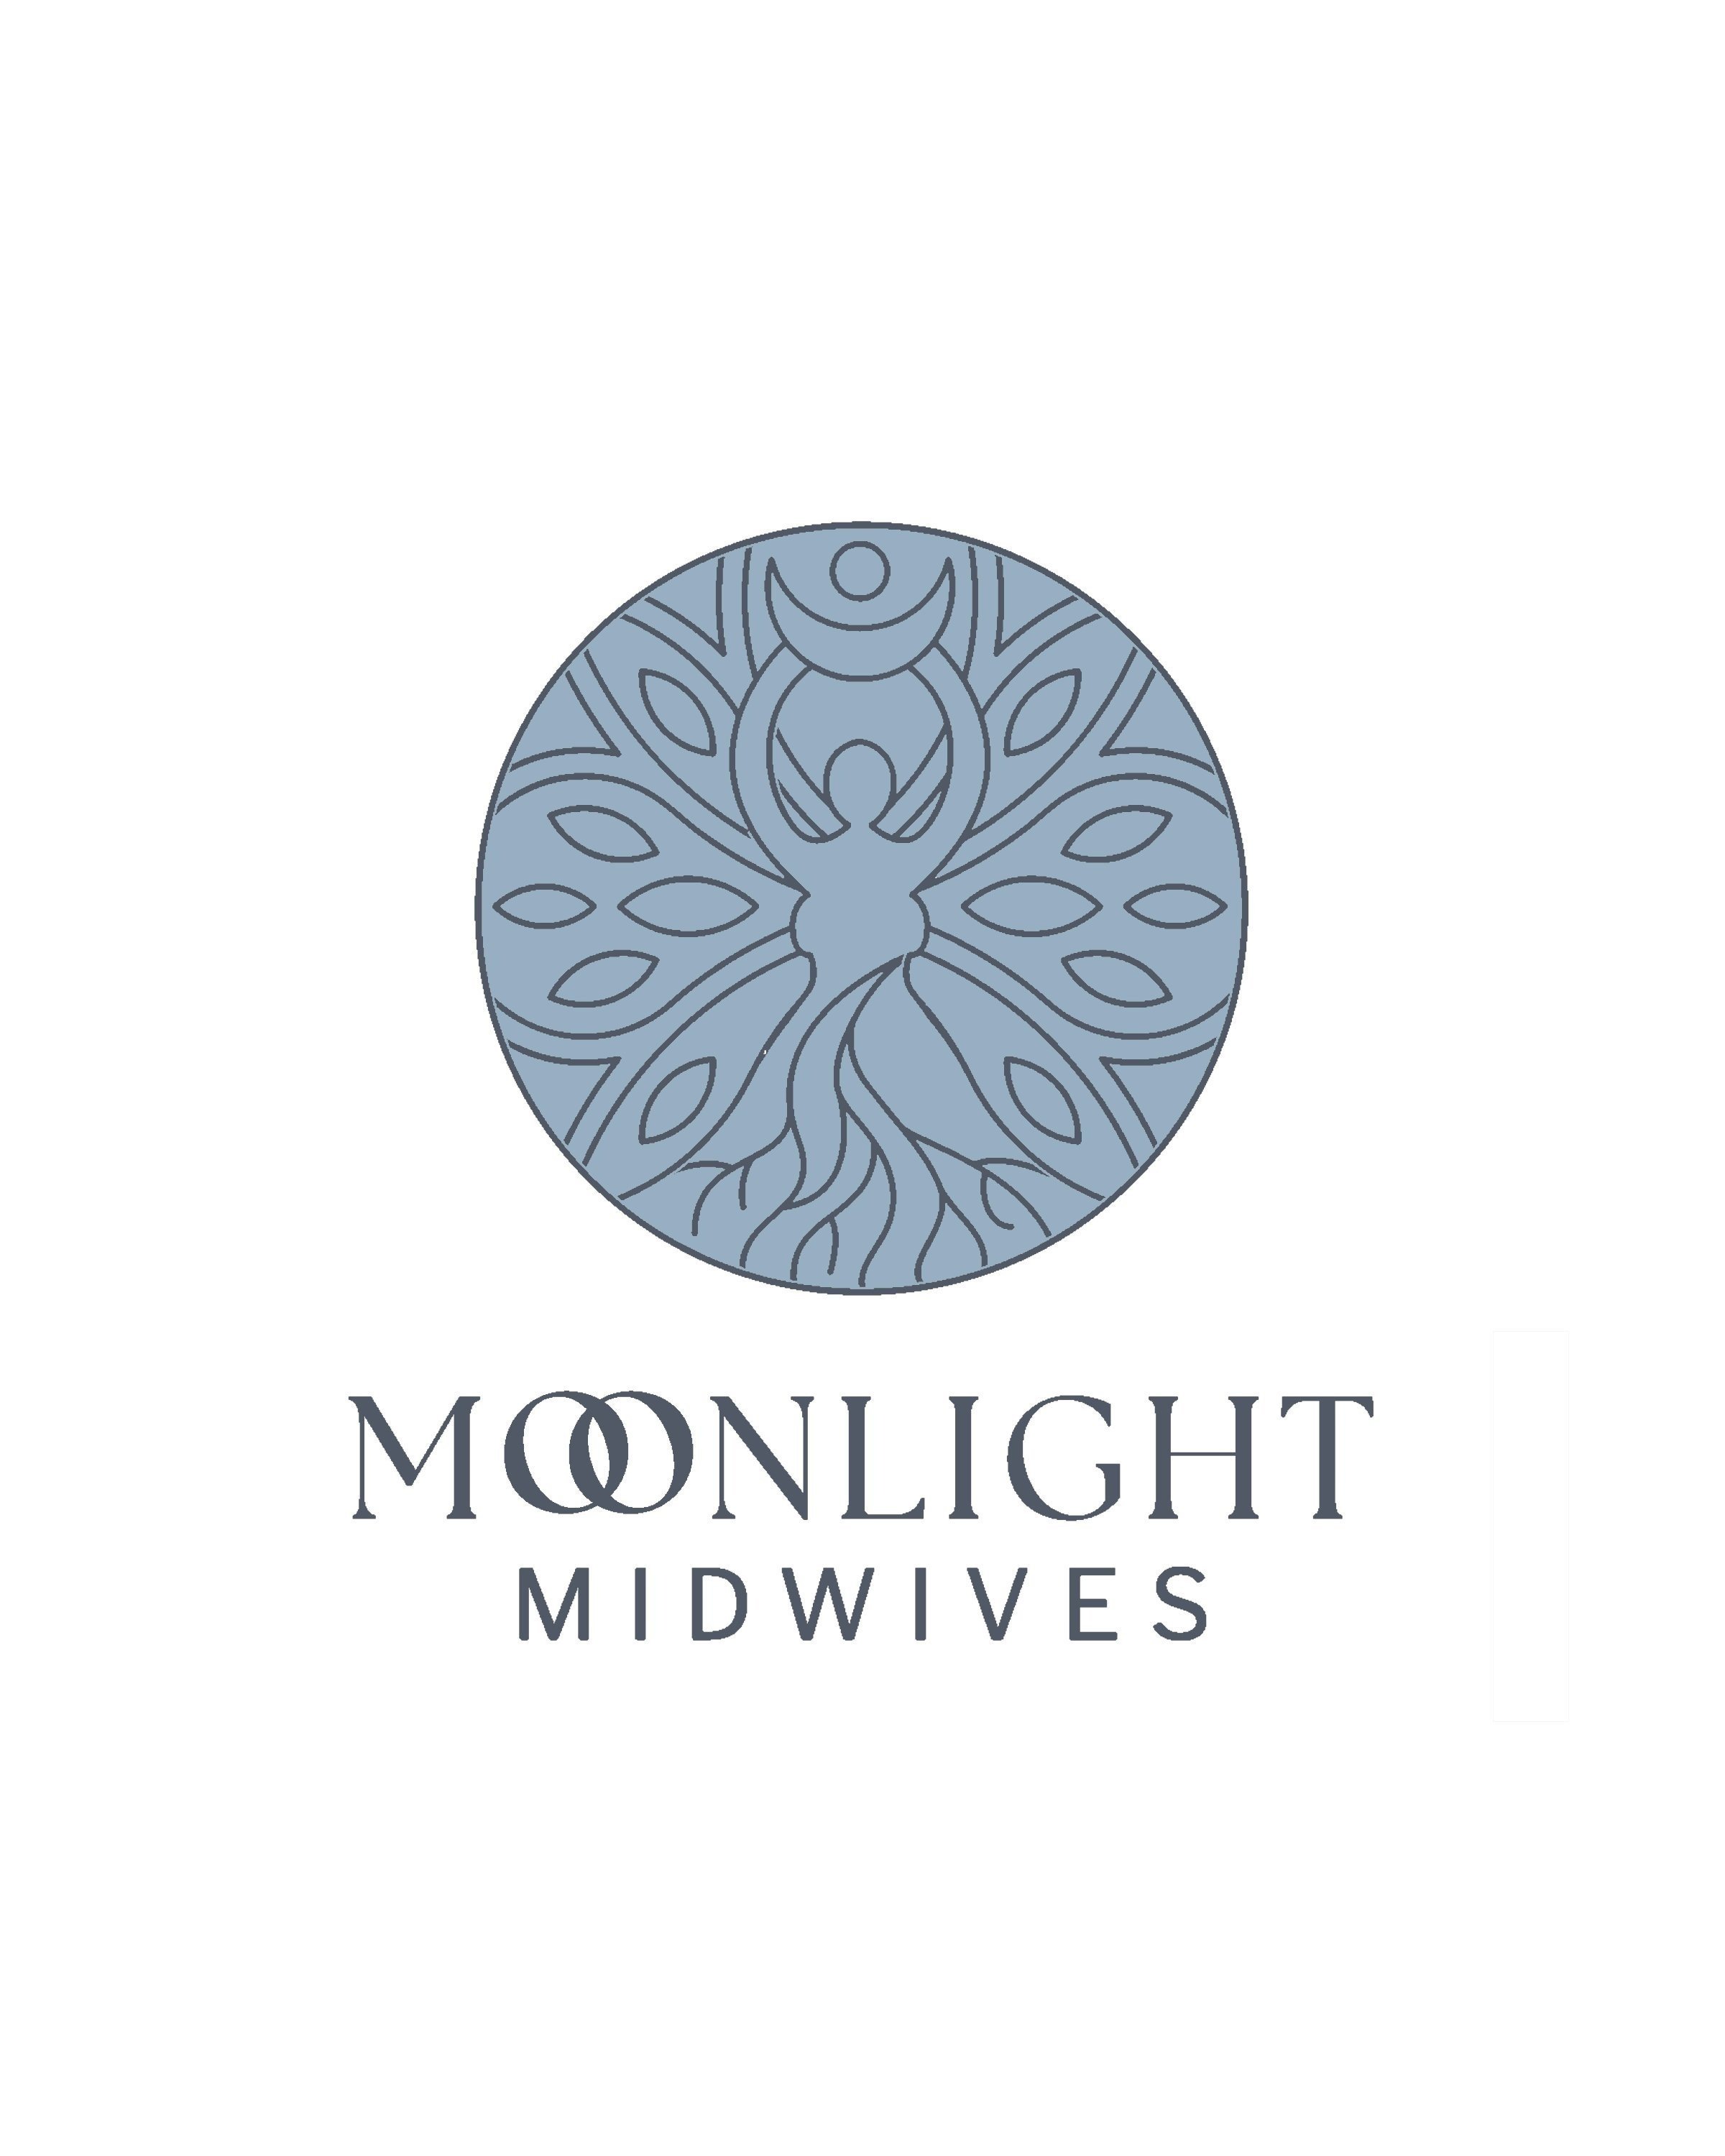 Moonlight Midwives